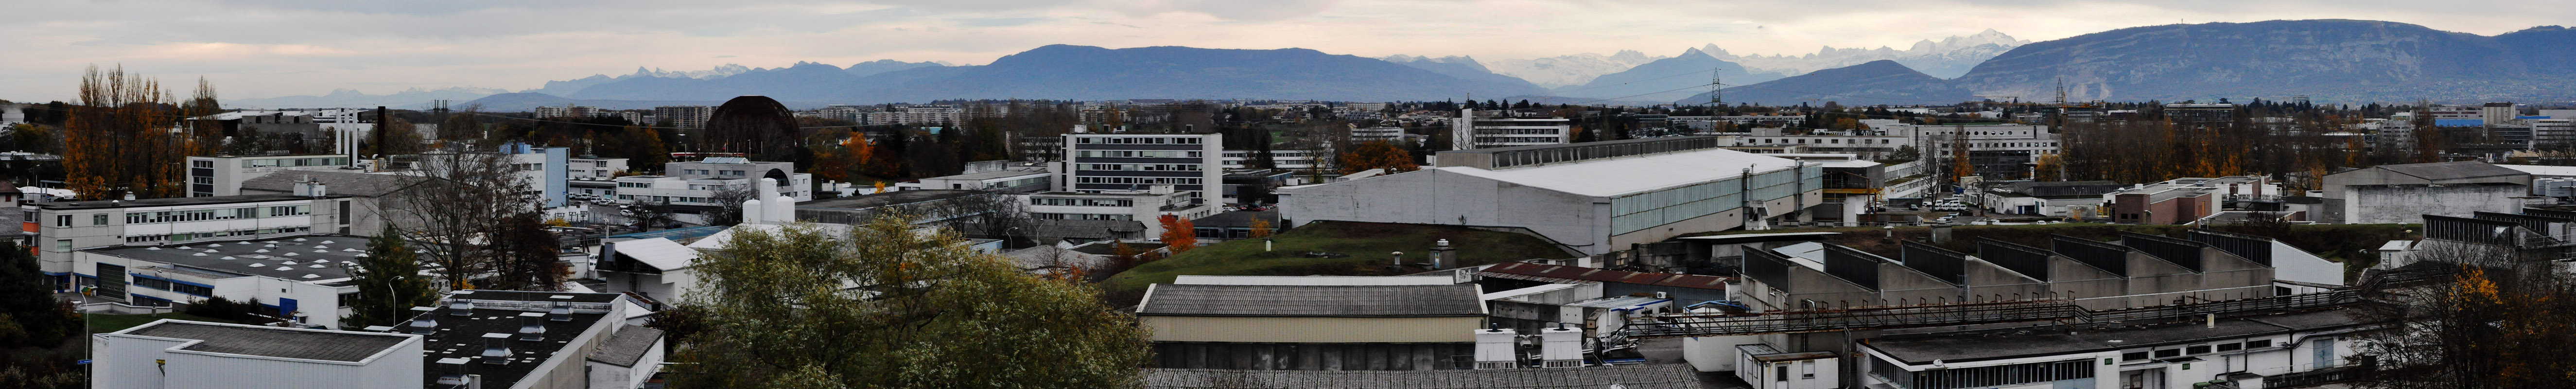 Panorama view of the CERN Meiryn site (Southern half) seen from the building 361